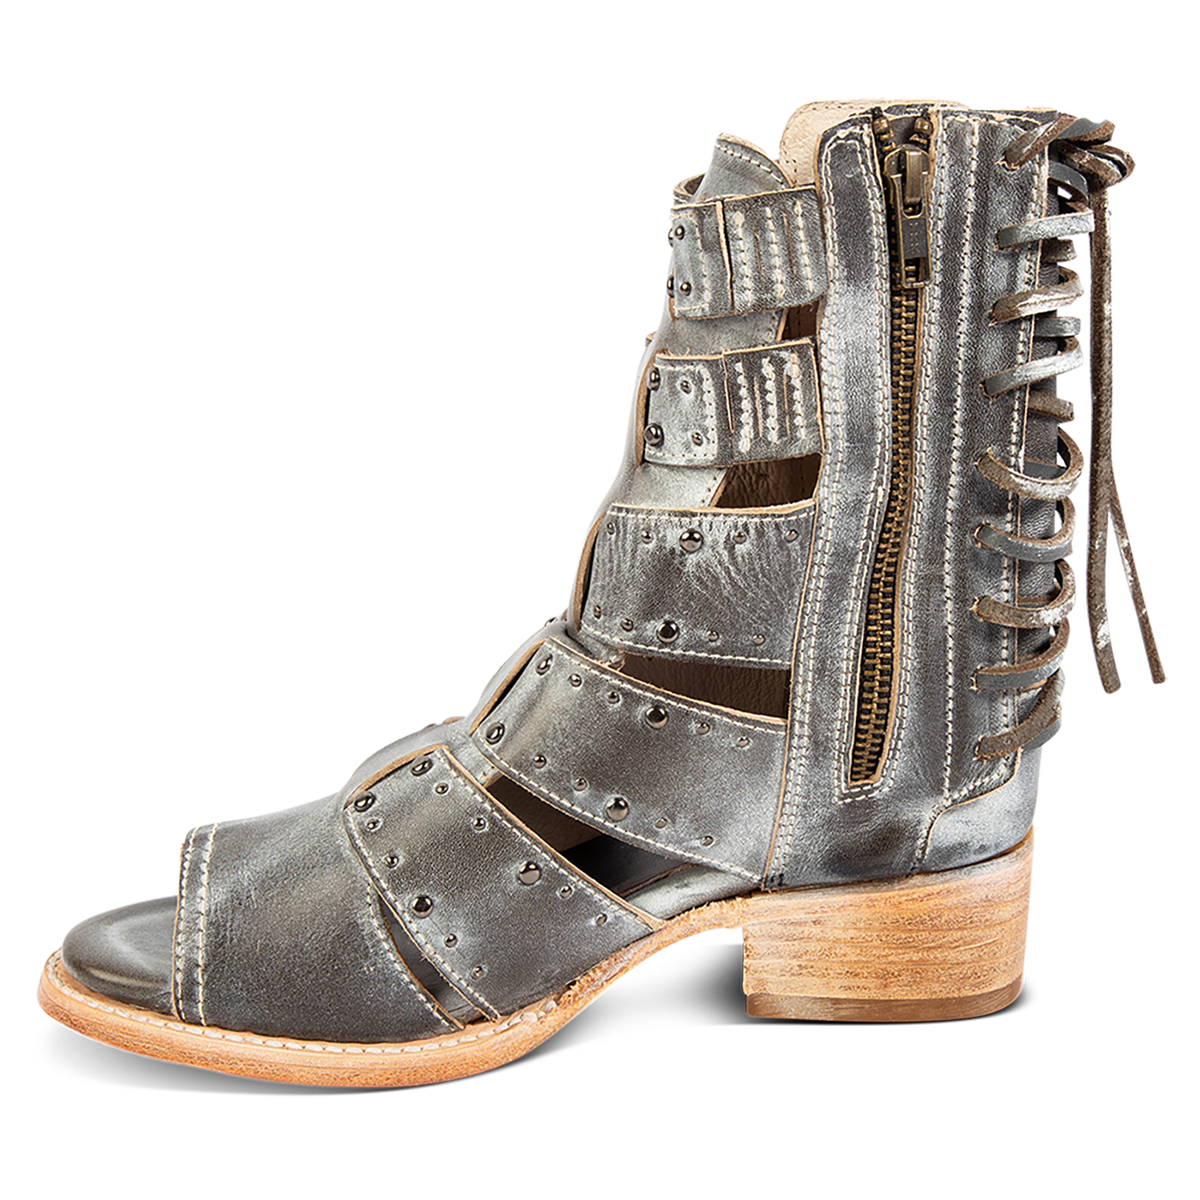 Inside view showing FREEBIRD women's Ghost ice leather sandal with an inside working brass zipper, back panel lacing and an exposed exterior